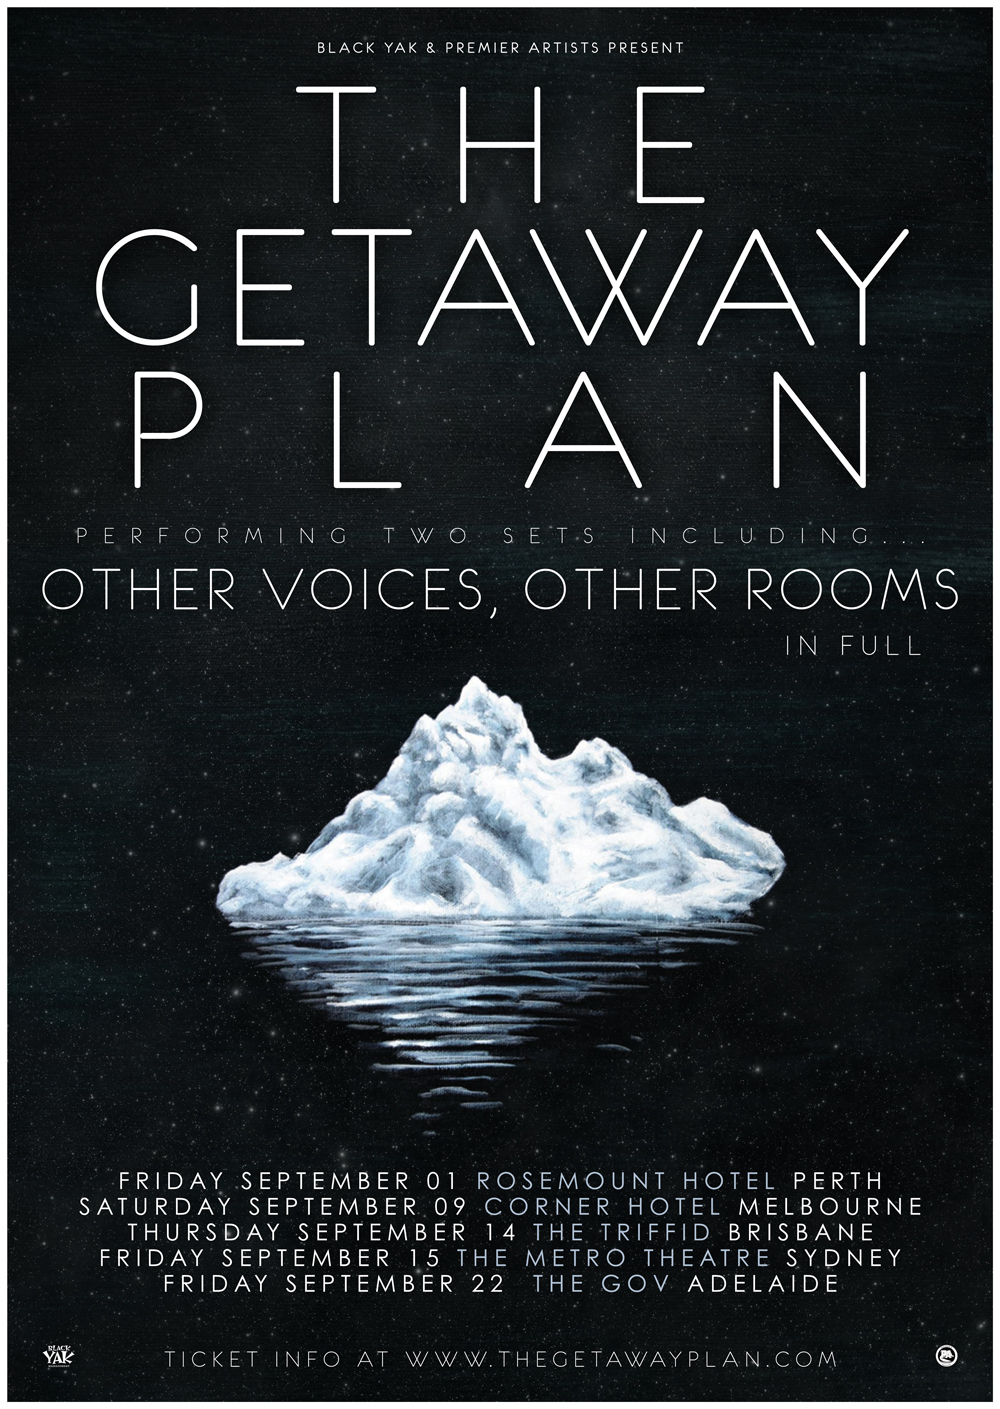 The Getaway Plan “Other Voices, Other Rooms” Tour